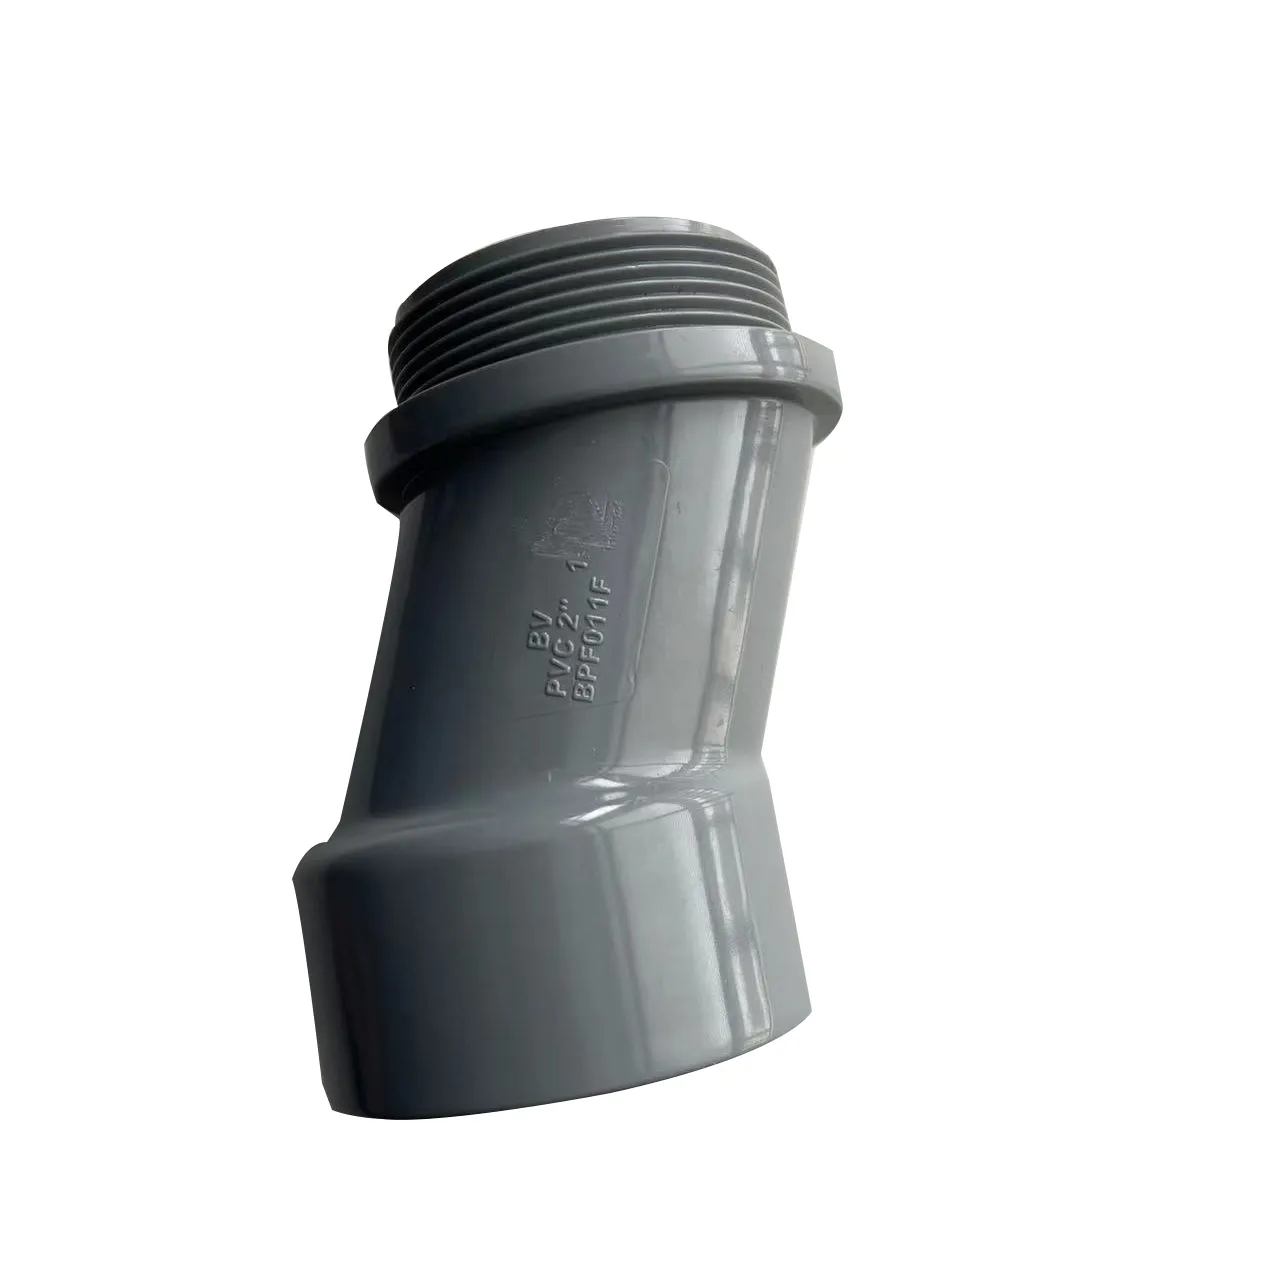 2 Inch External Threaded Grey Conduit PVC Meter Offset Rigid Pipe Fittings Male Type Conduit Fittings